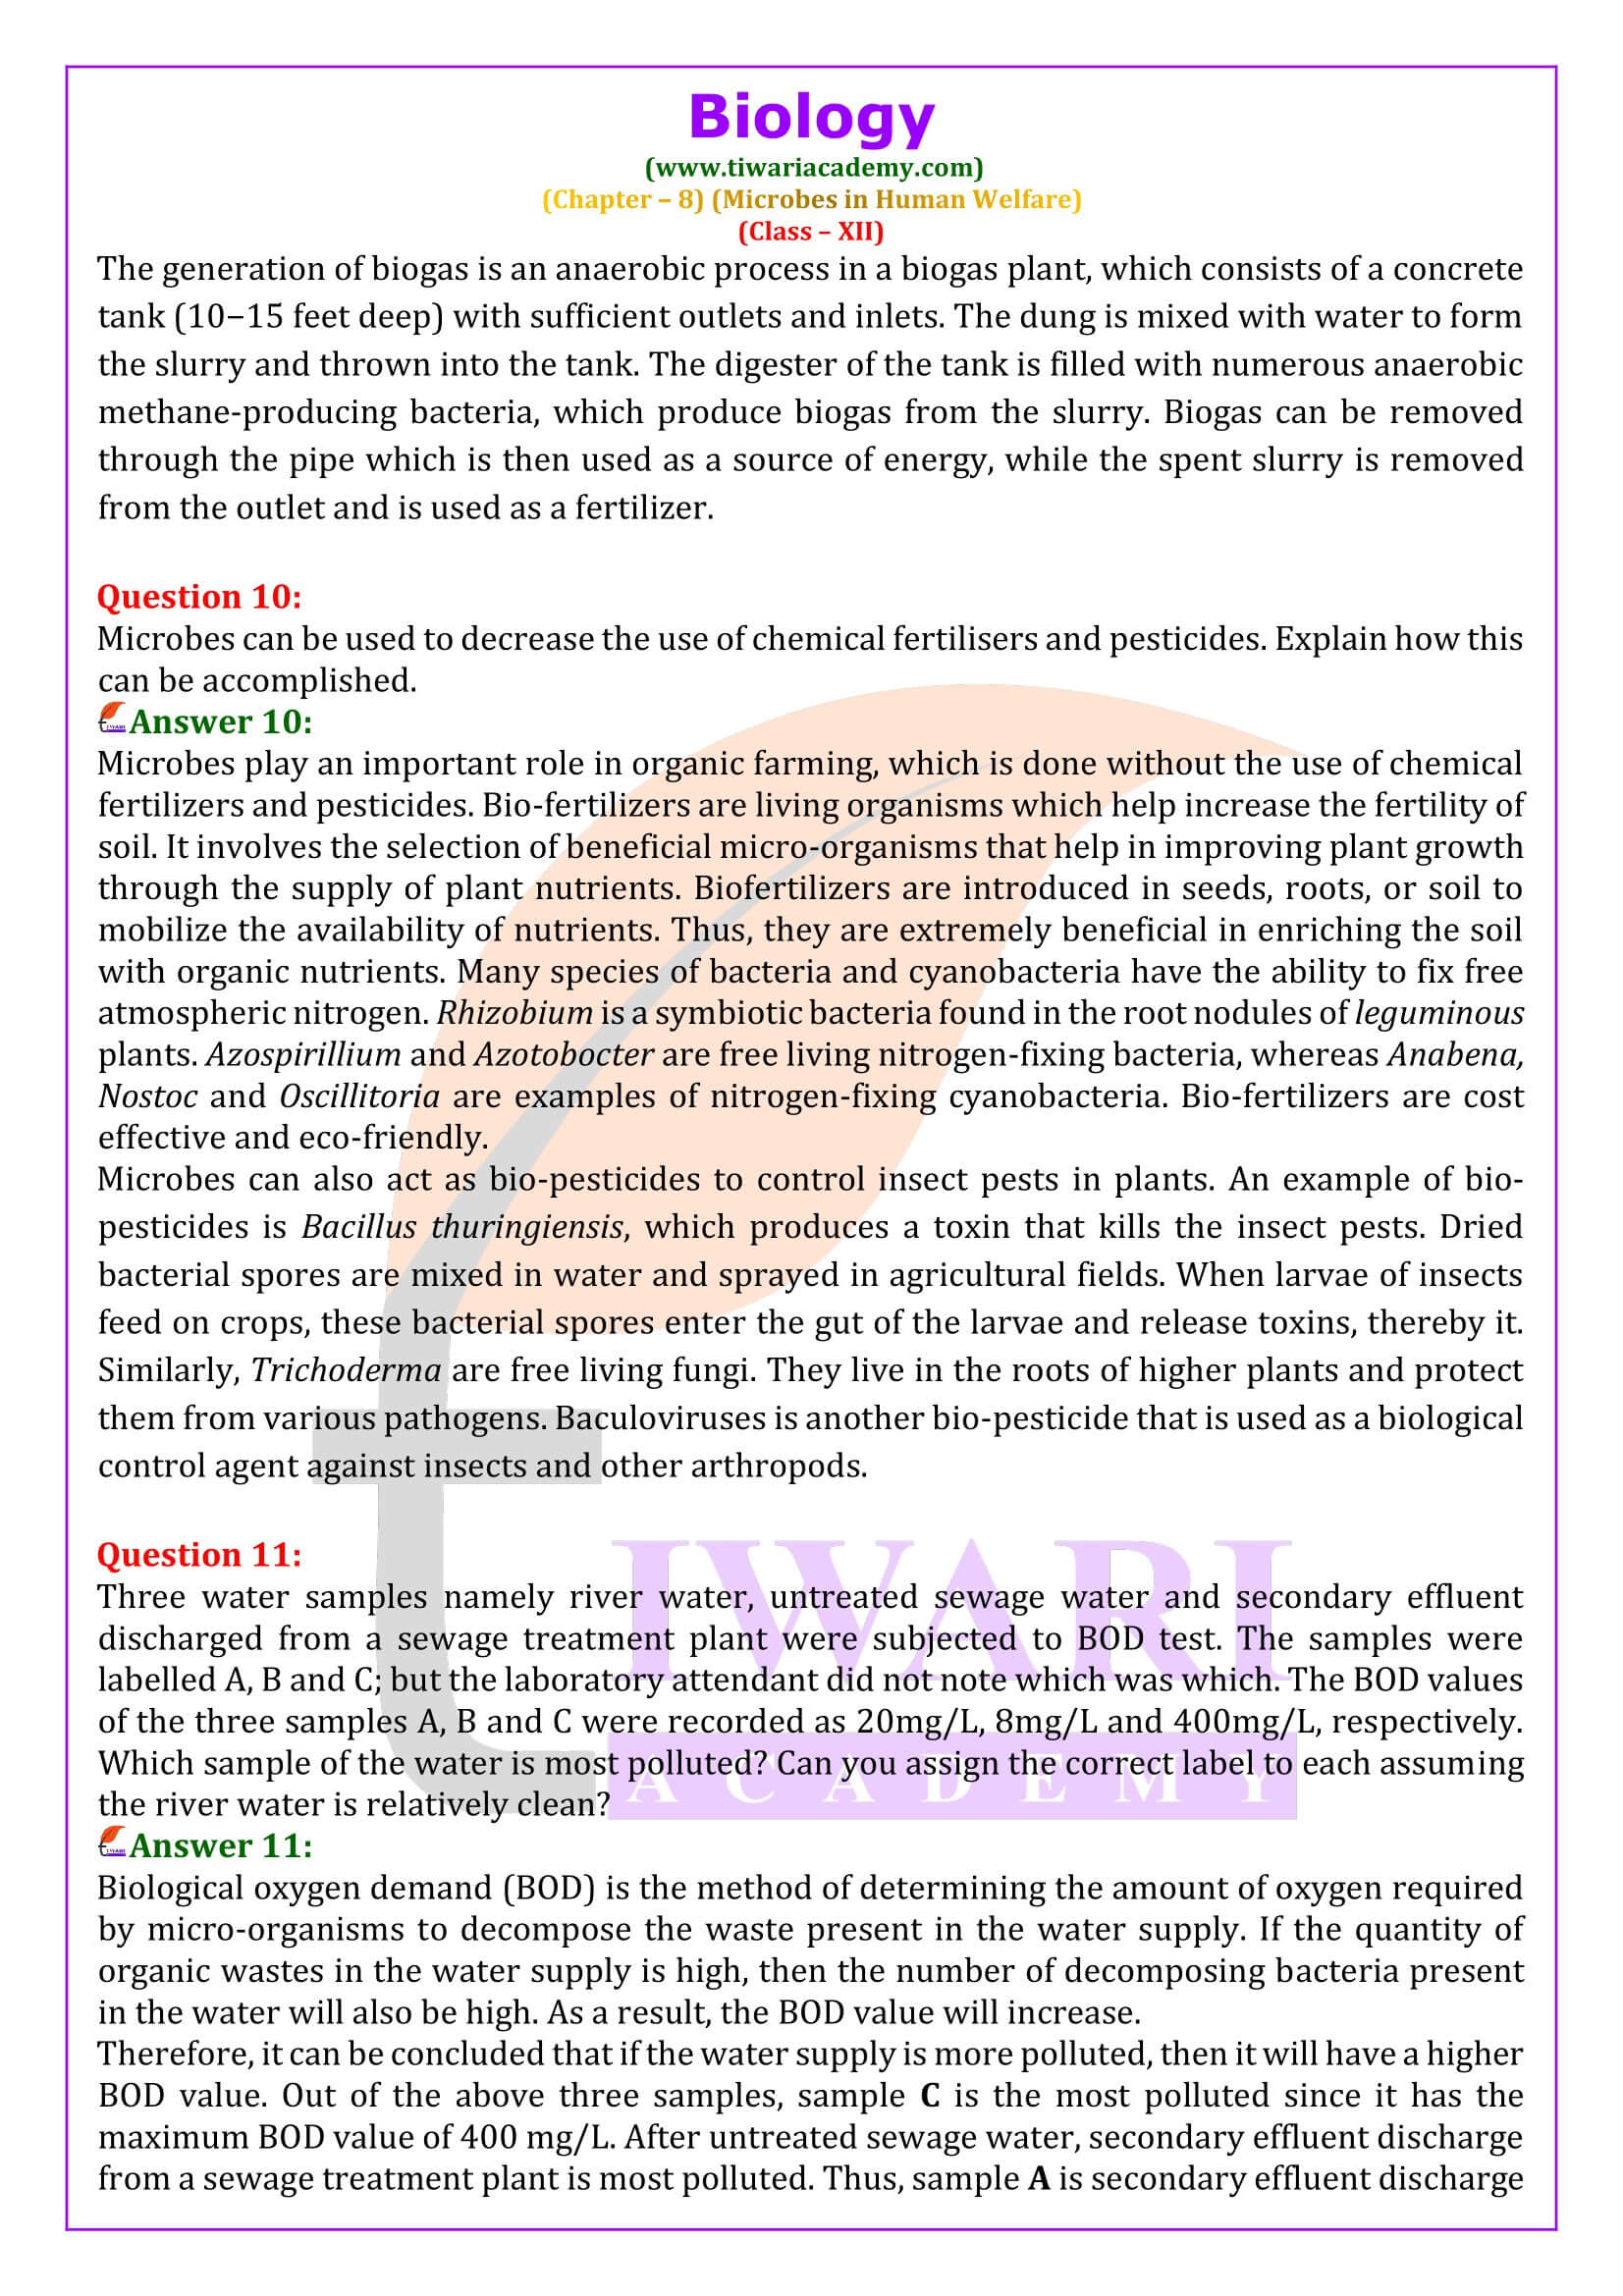 NCERT Solutions for Class 12 Biology Chapter 8 in English Medium